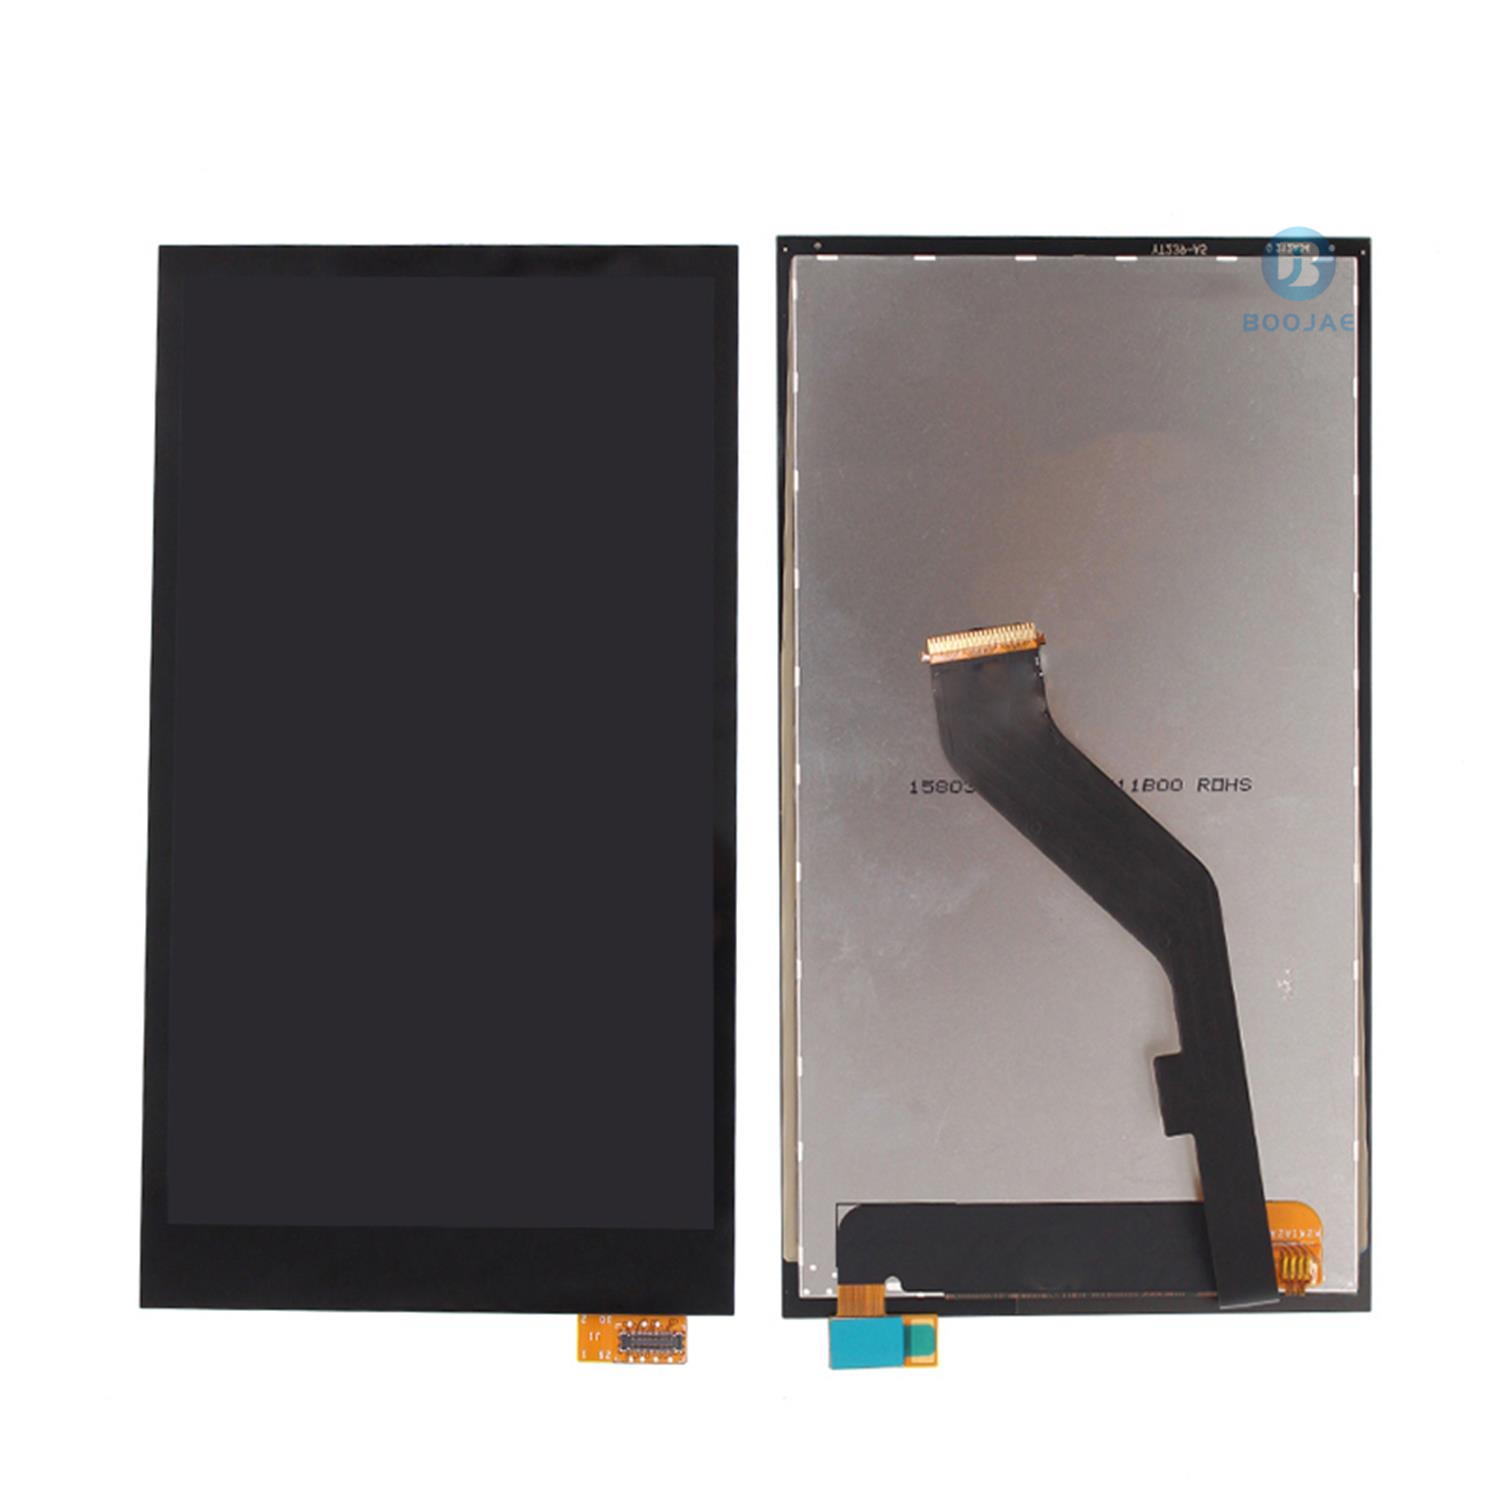 HTC Desire 826 LCD Screen Display , Lcd Assembly Replacement